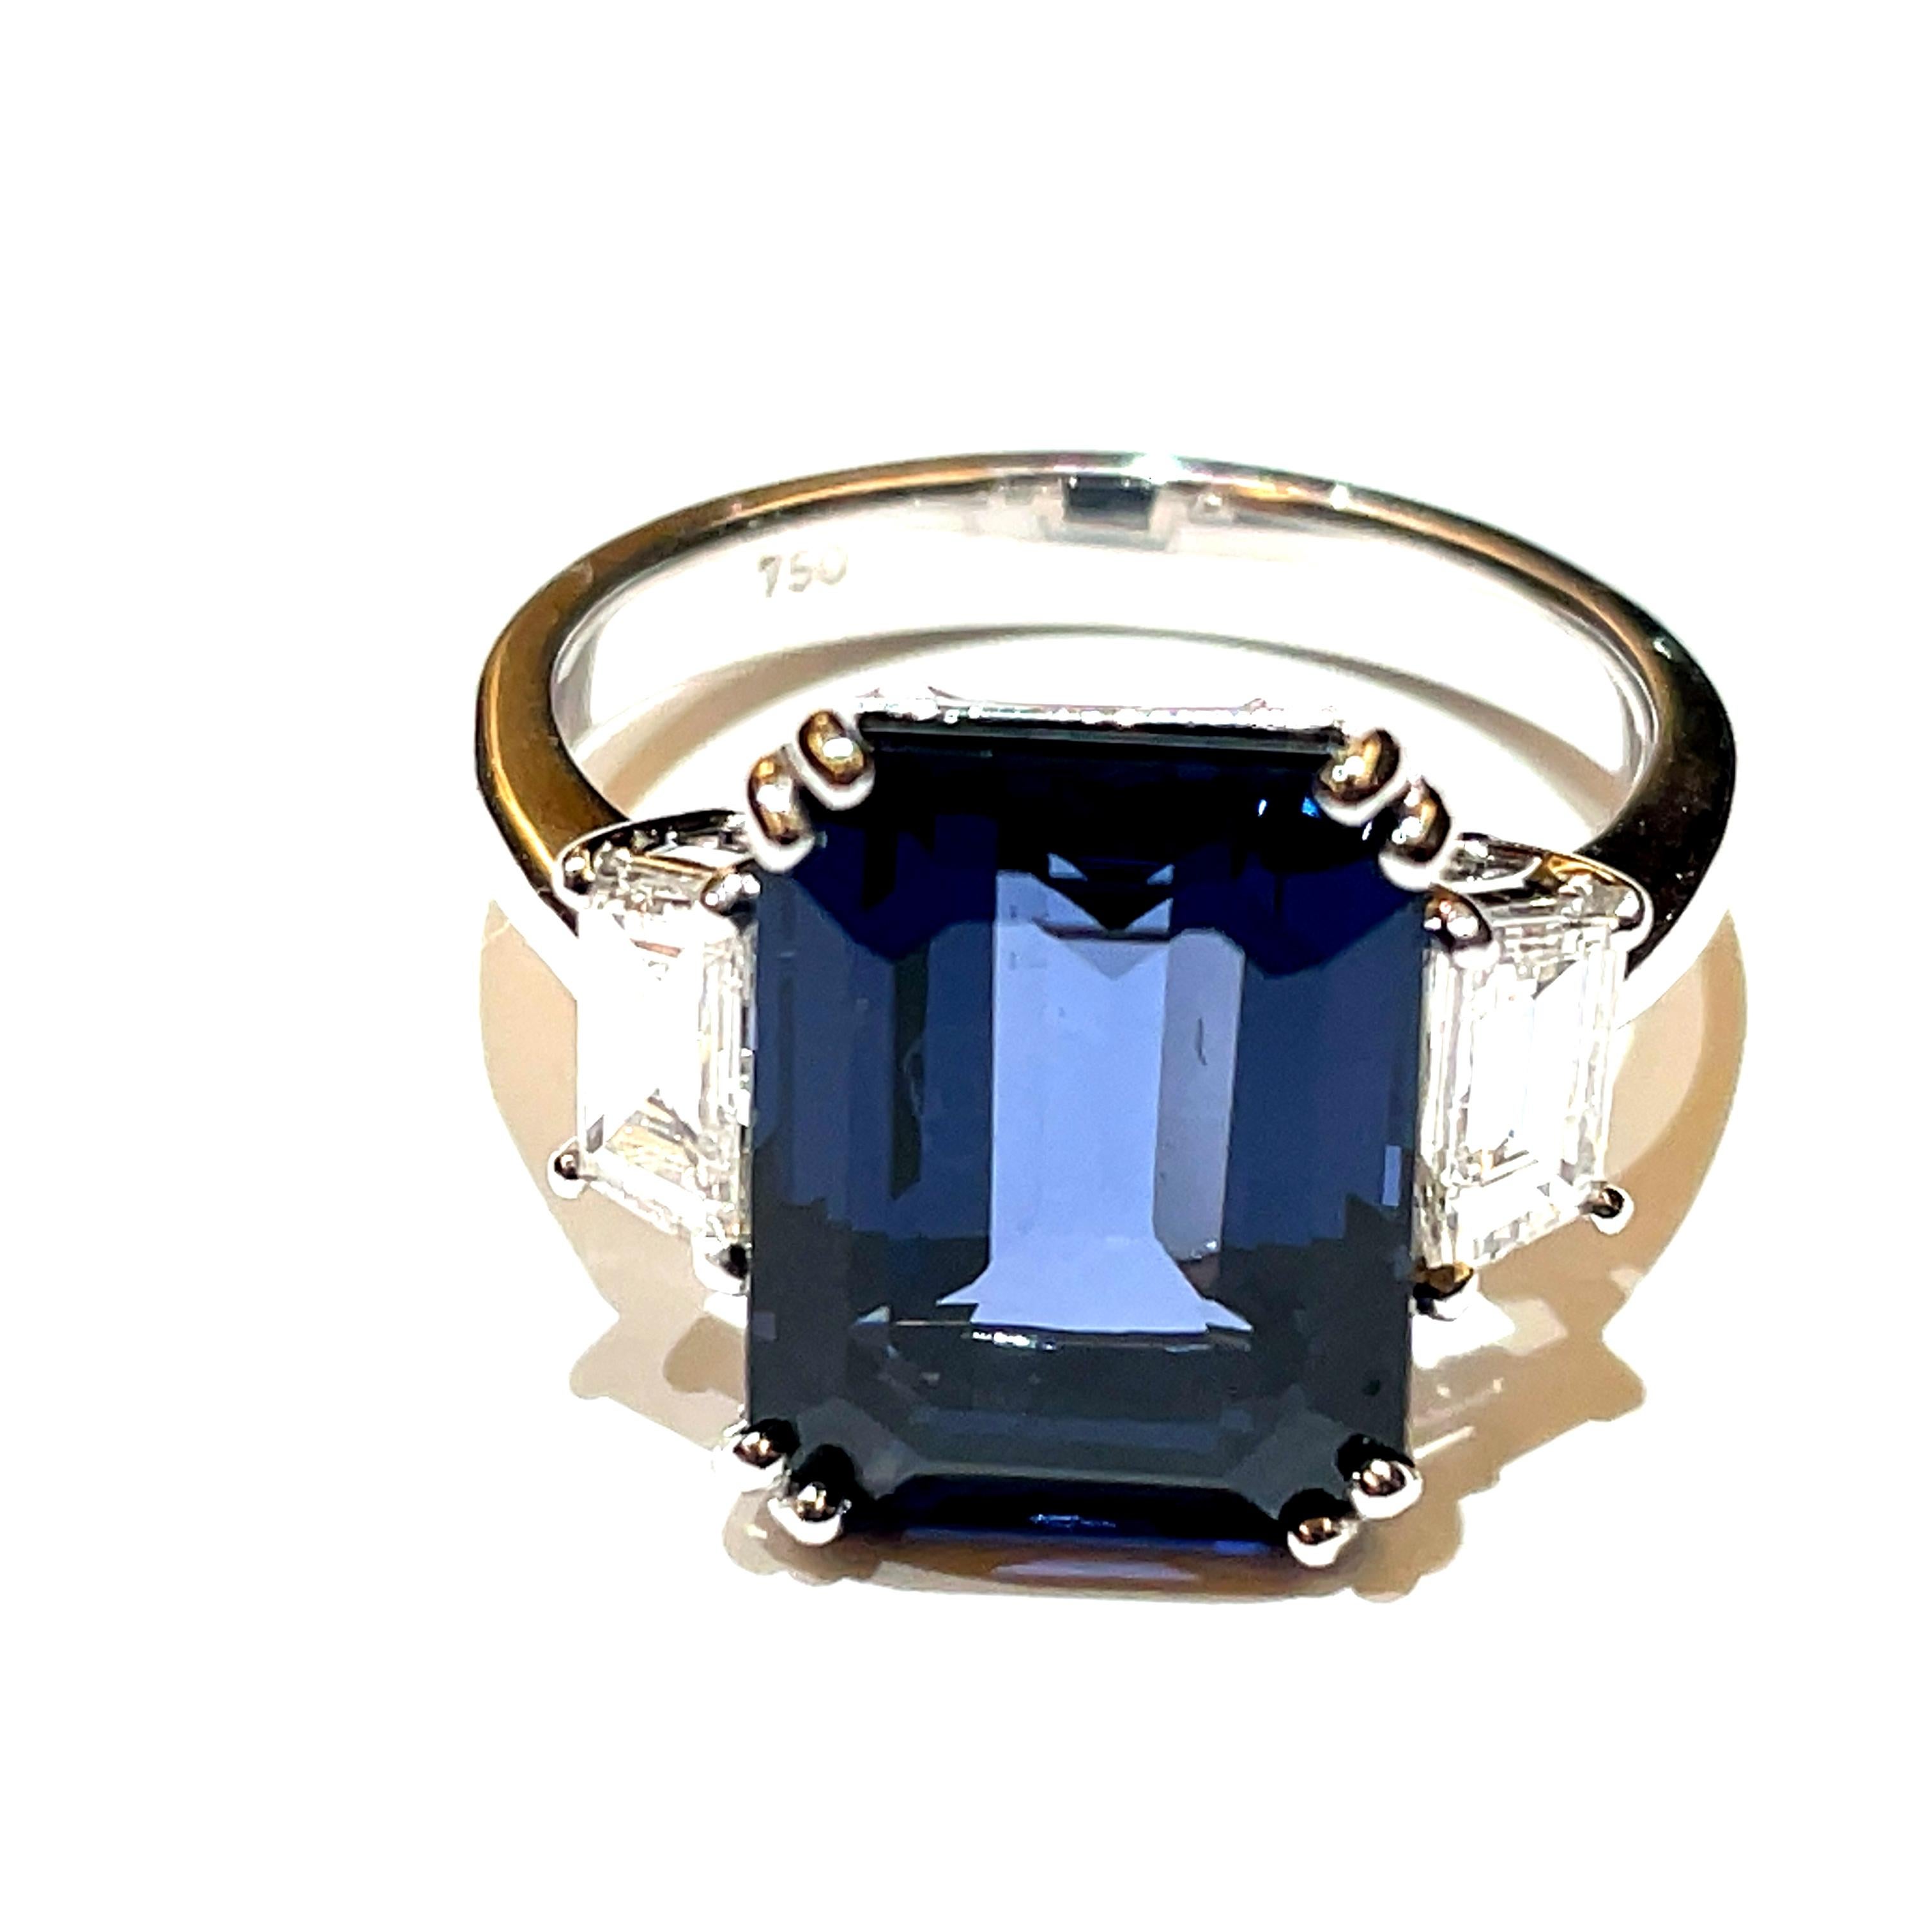 Centrally positioned is a stunning Greyish Blue Spinel Octagon, weighing a substantial 6.91 carats, sourced from Sri Lanka and certified by GRS as 'No Heat.' 

This exceptional gemstone exhibits a mesmerizing greyish-blue hue, reminiscent of serene